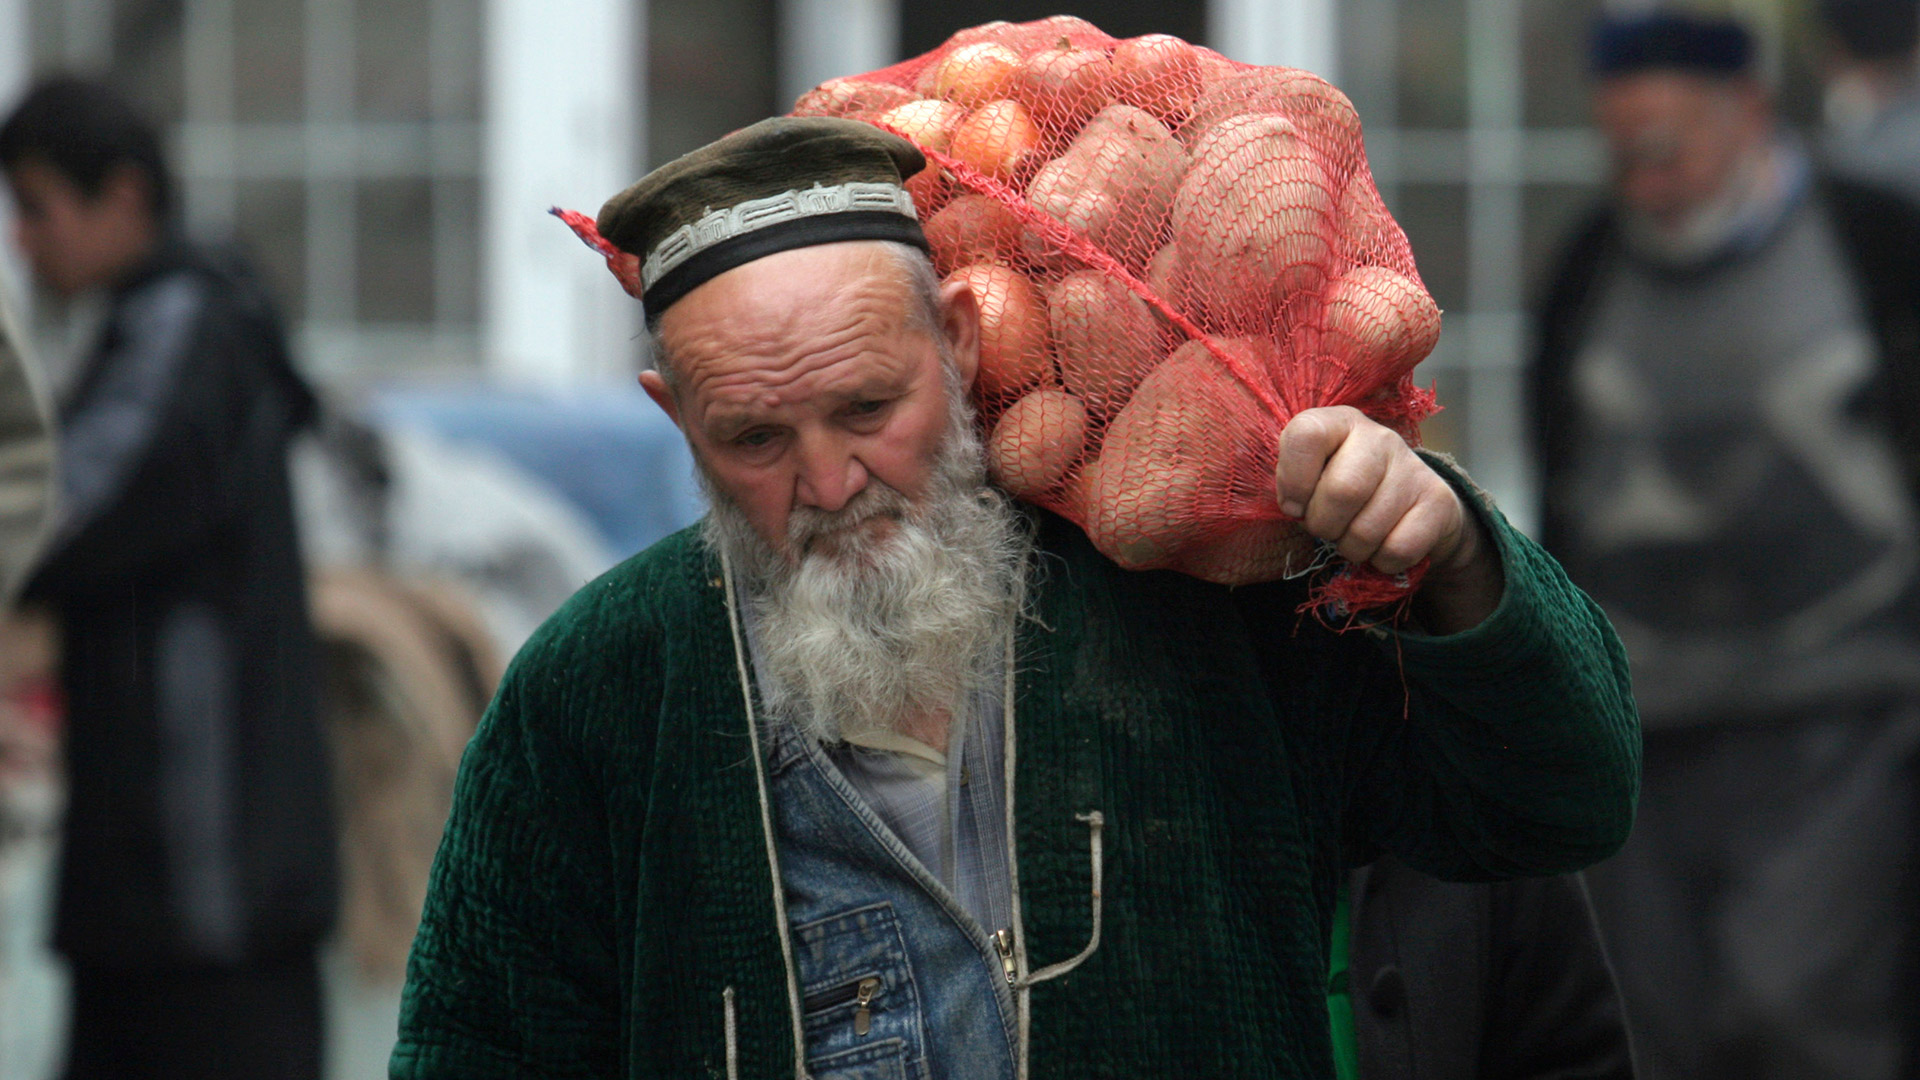 A man carries a sack of potatoes at a market in Dushanbe February 23, 2009. Picture taken February 23, 2009.  Plagued by poverty, rampant crime and now collapsing incomes, Tajikistan risks turning into a failed state -- a setback for the West which sees it as a new supply transit point for U.S. troops fighting in neighbouring Afghanistan. To match feature TAJIKISTAN-CRISIS/  REUTERS/Nozim Kalandarov (TAJIKISTAN POLITICS BUSINESS SOCIETY)